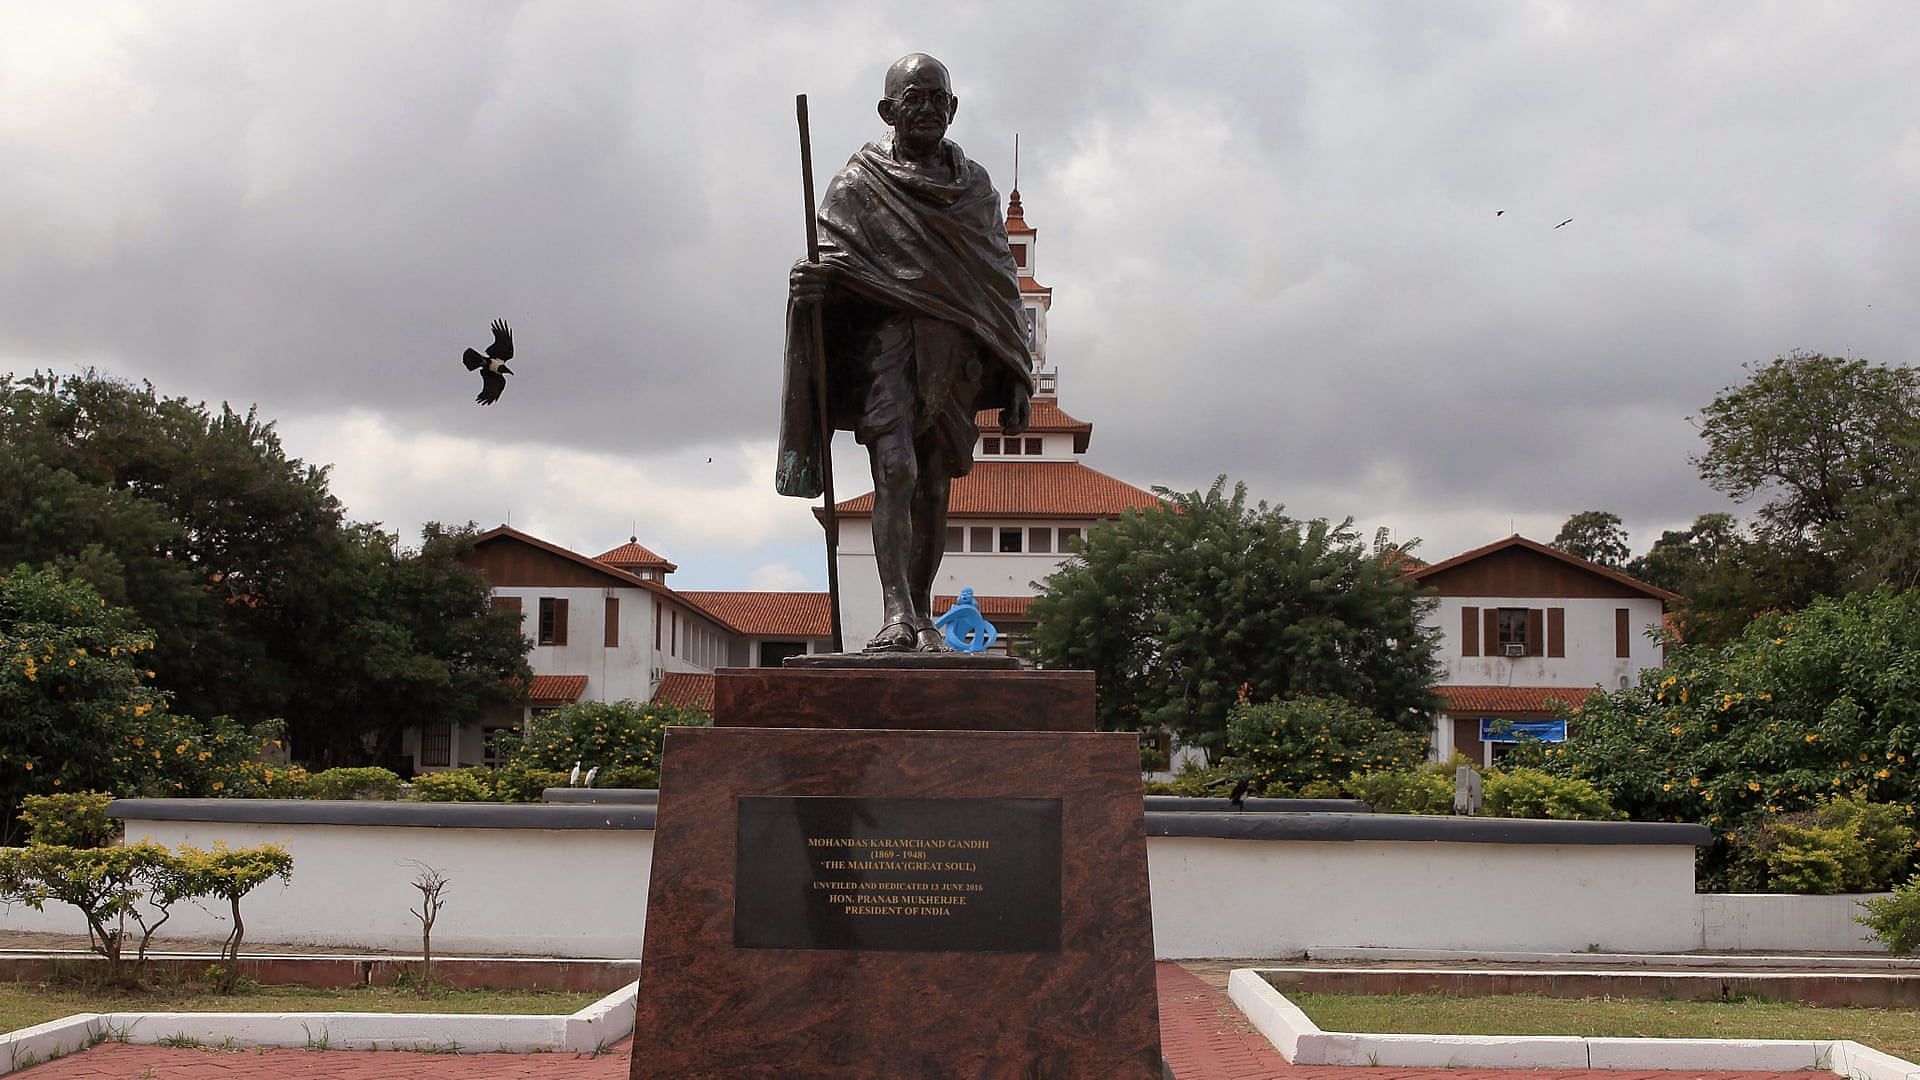  A statue of Indian independence leader Mahatma Gandhi in Accra, Ghana. The statue at the university was removed in the middle of the night, leaving a bare plinth.